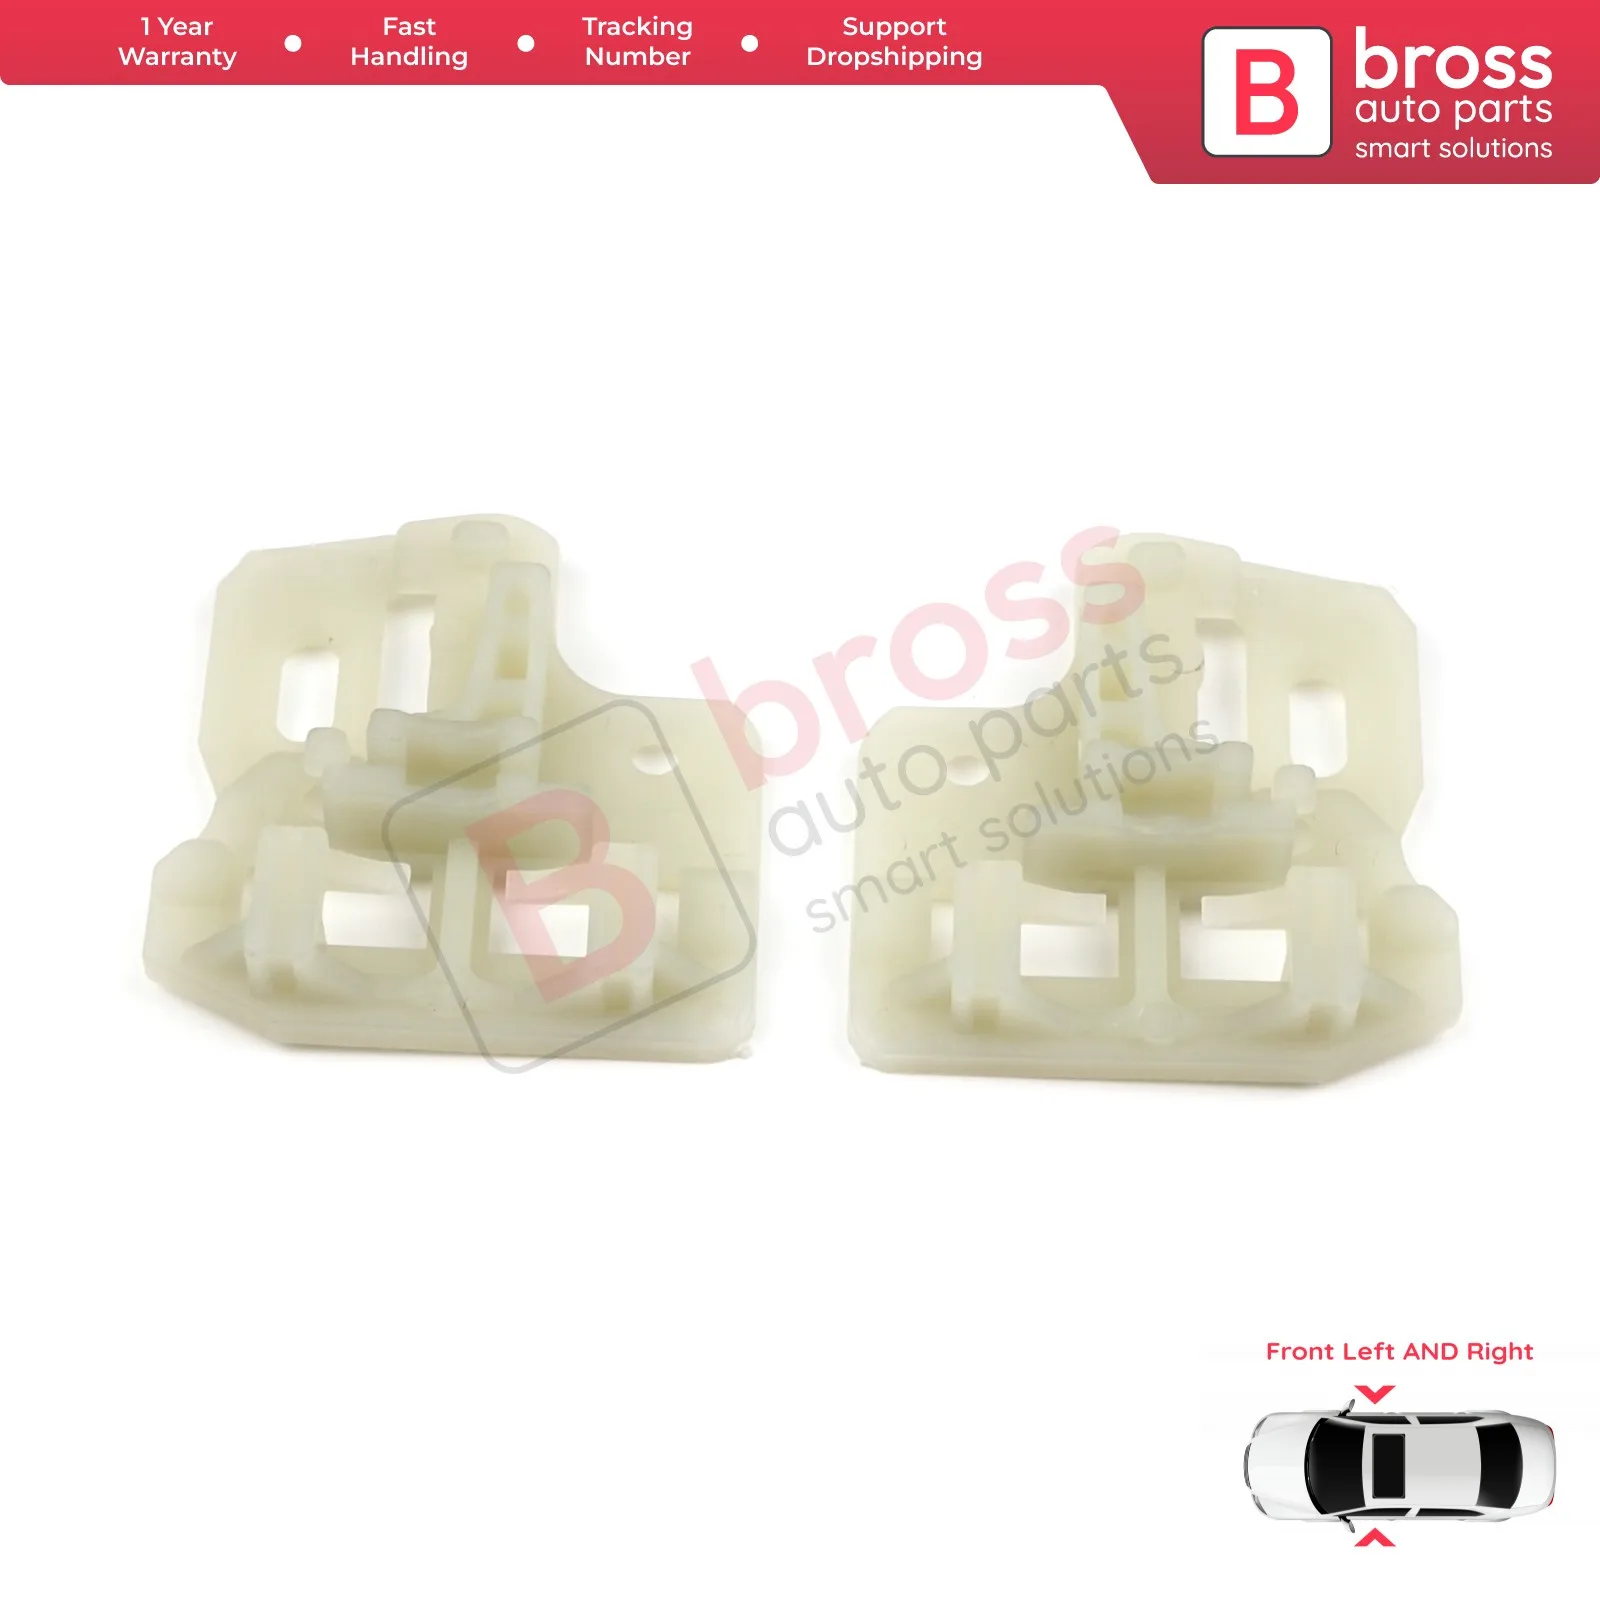 

Bross BWR211 + BWR212 2 Pieces Electrical Power Window Regulator Clips A and B, front Left or Right Doors for BMW X5 1999-2007